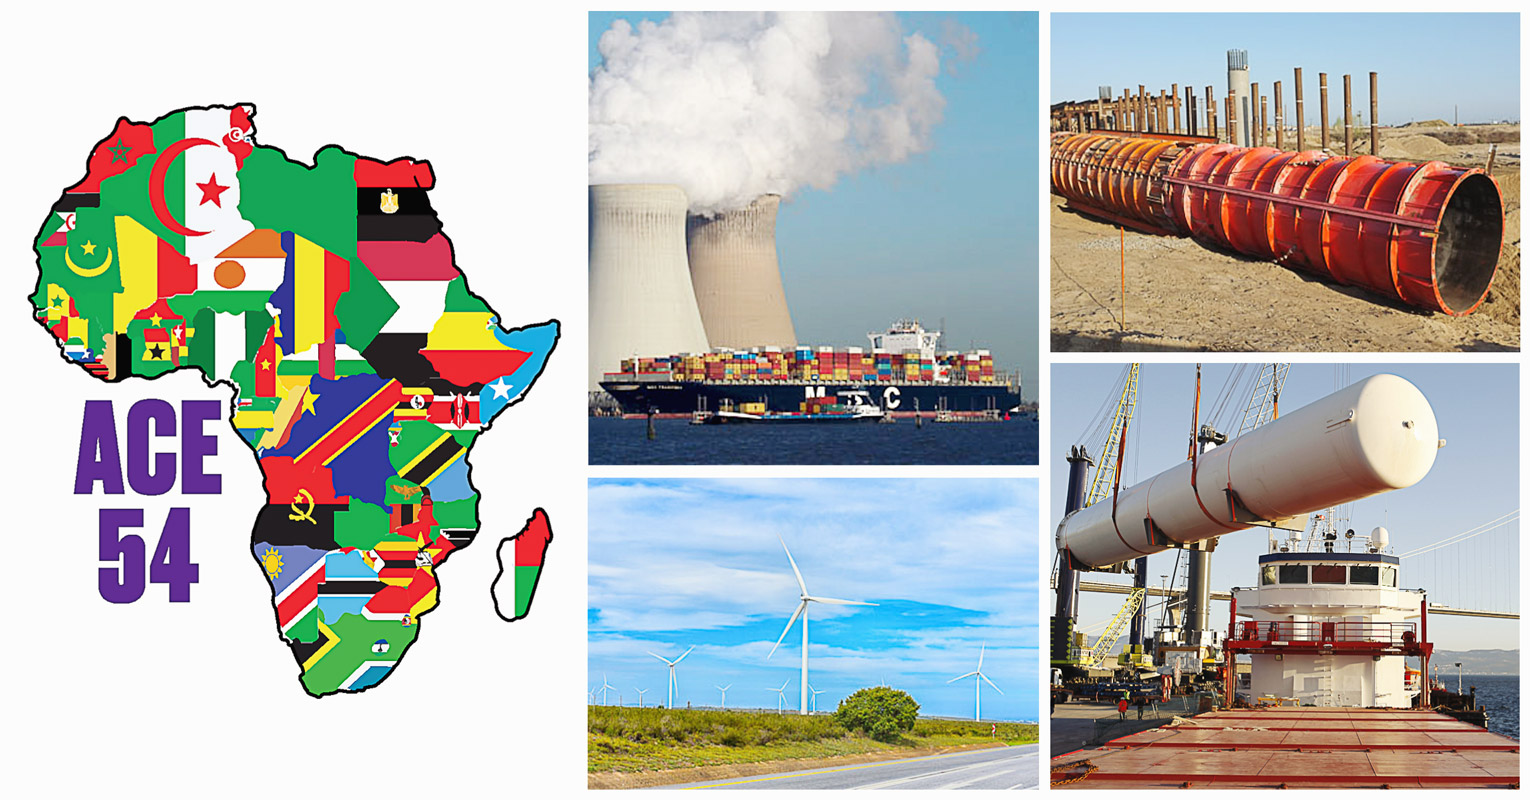 New service provider representing Africa – ACE 54 Project Management